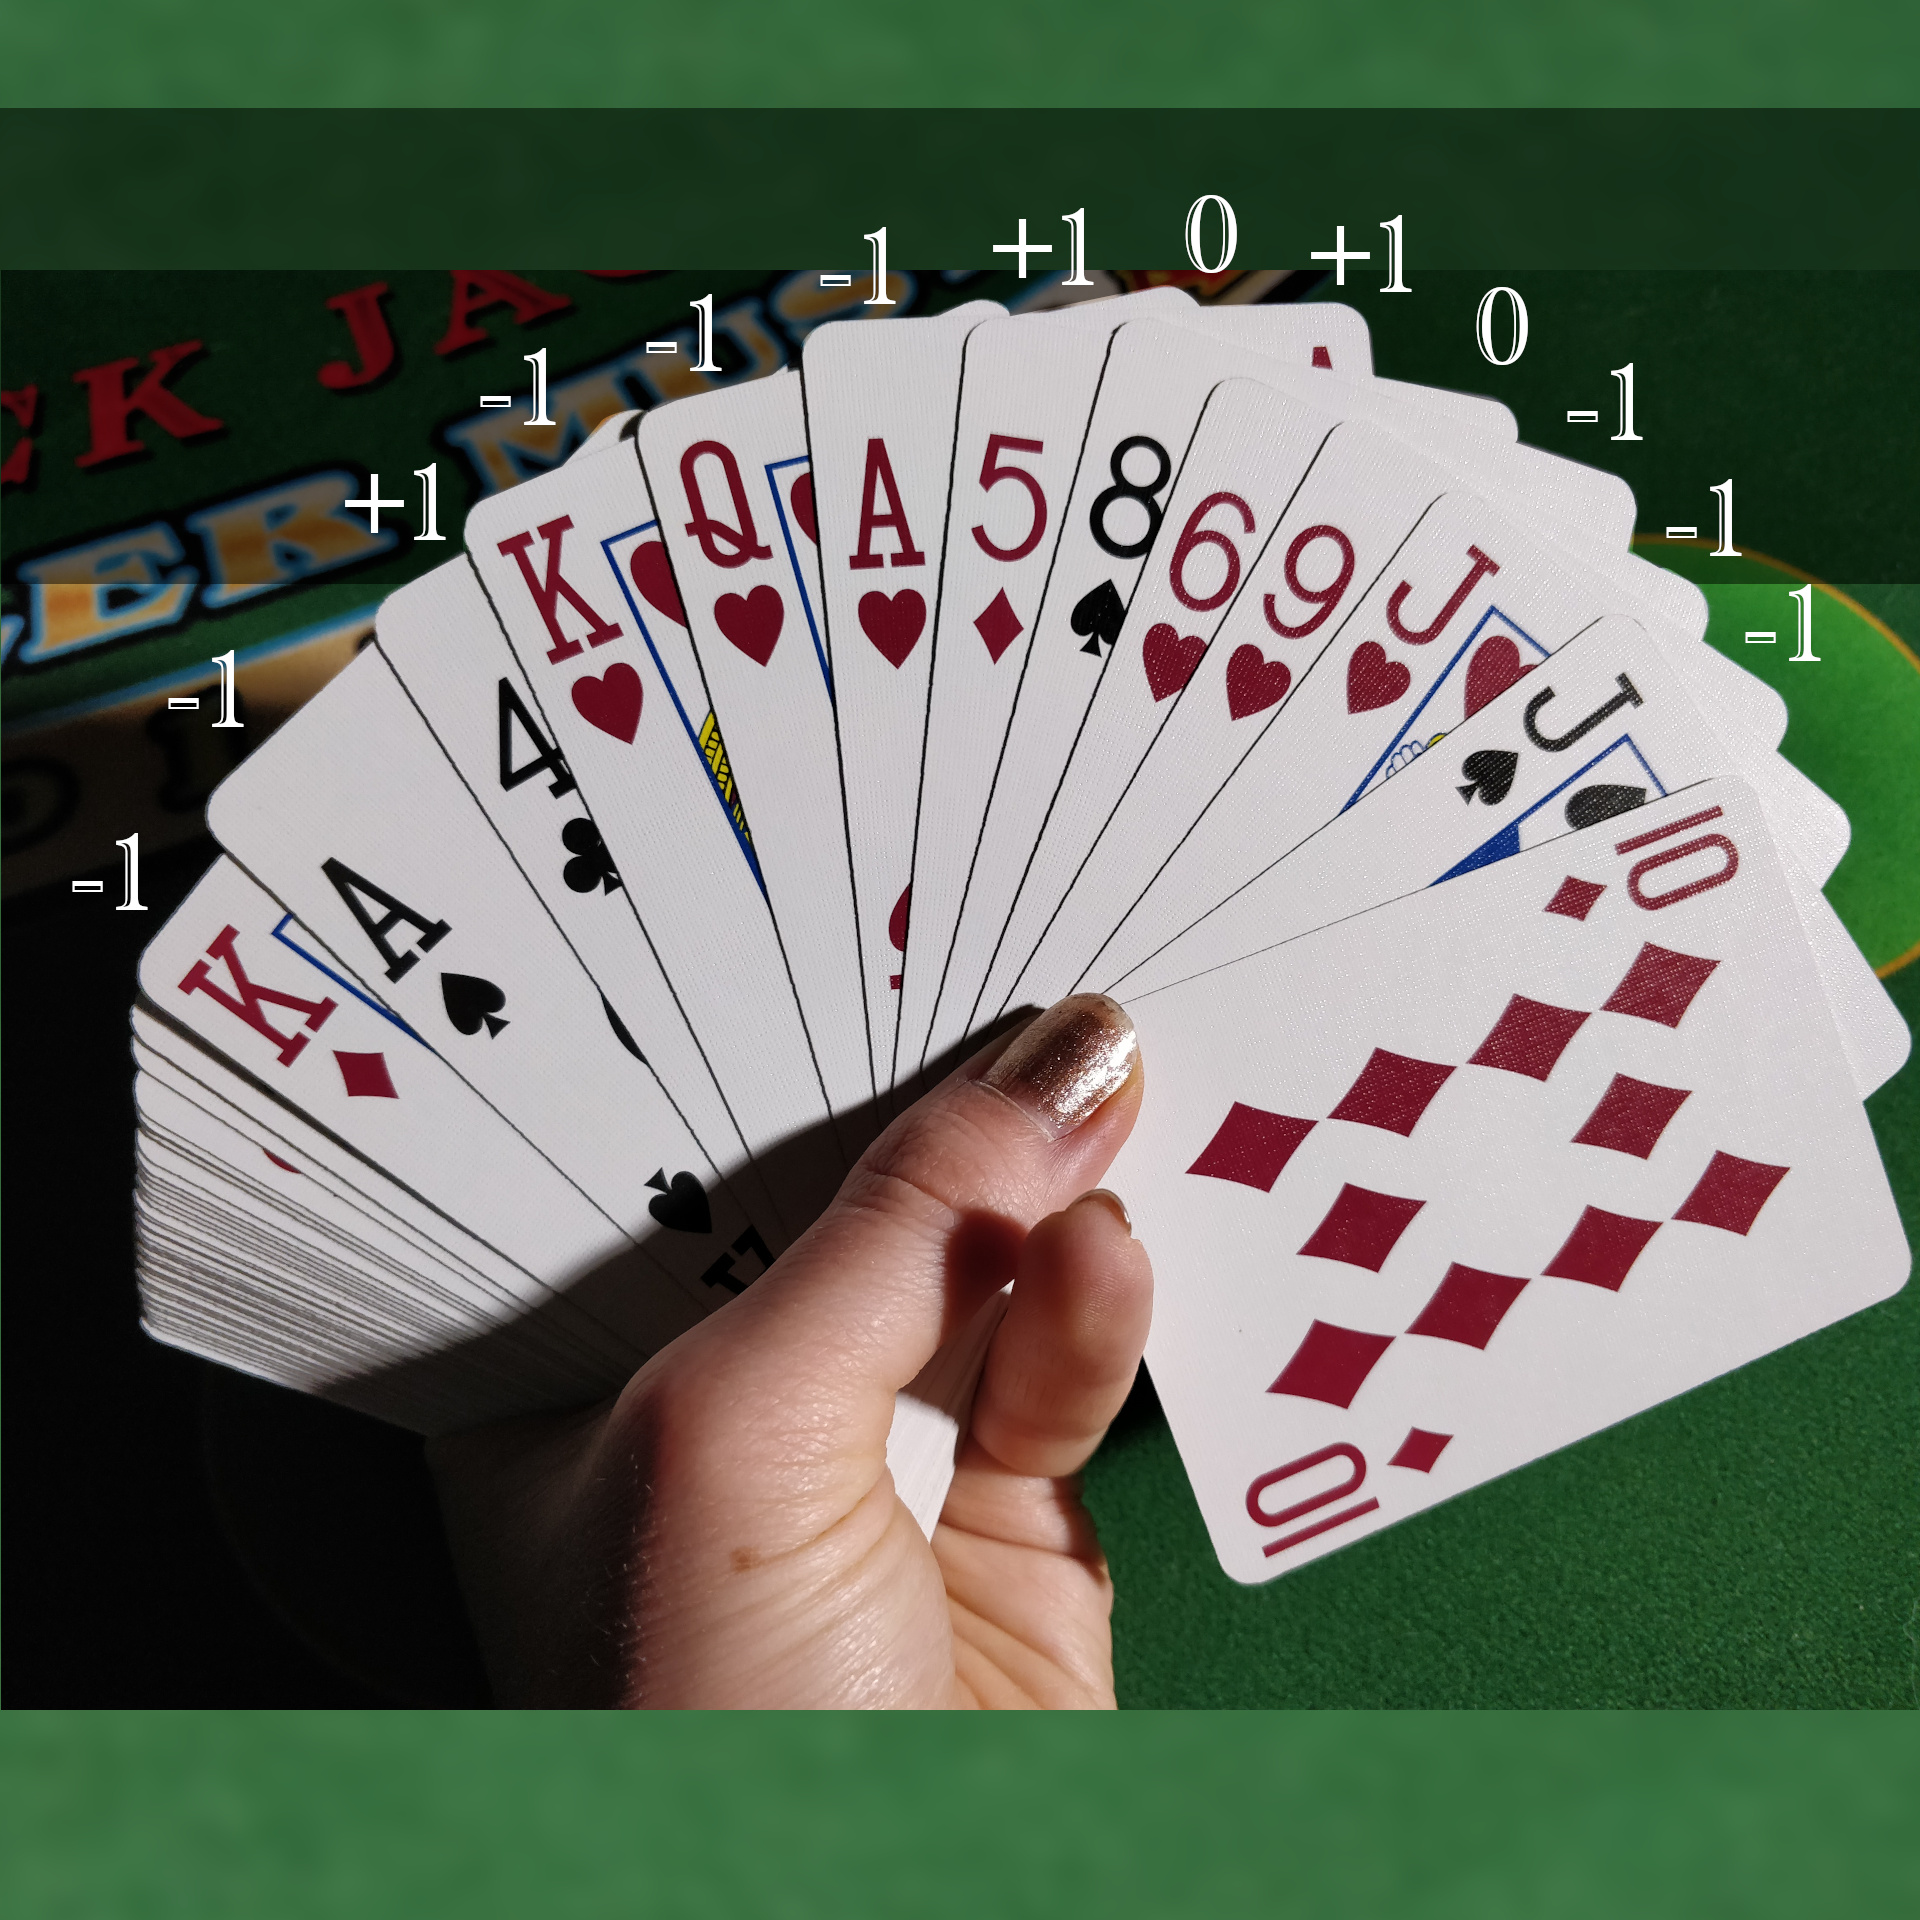 Value of Cards in Card Counting